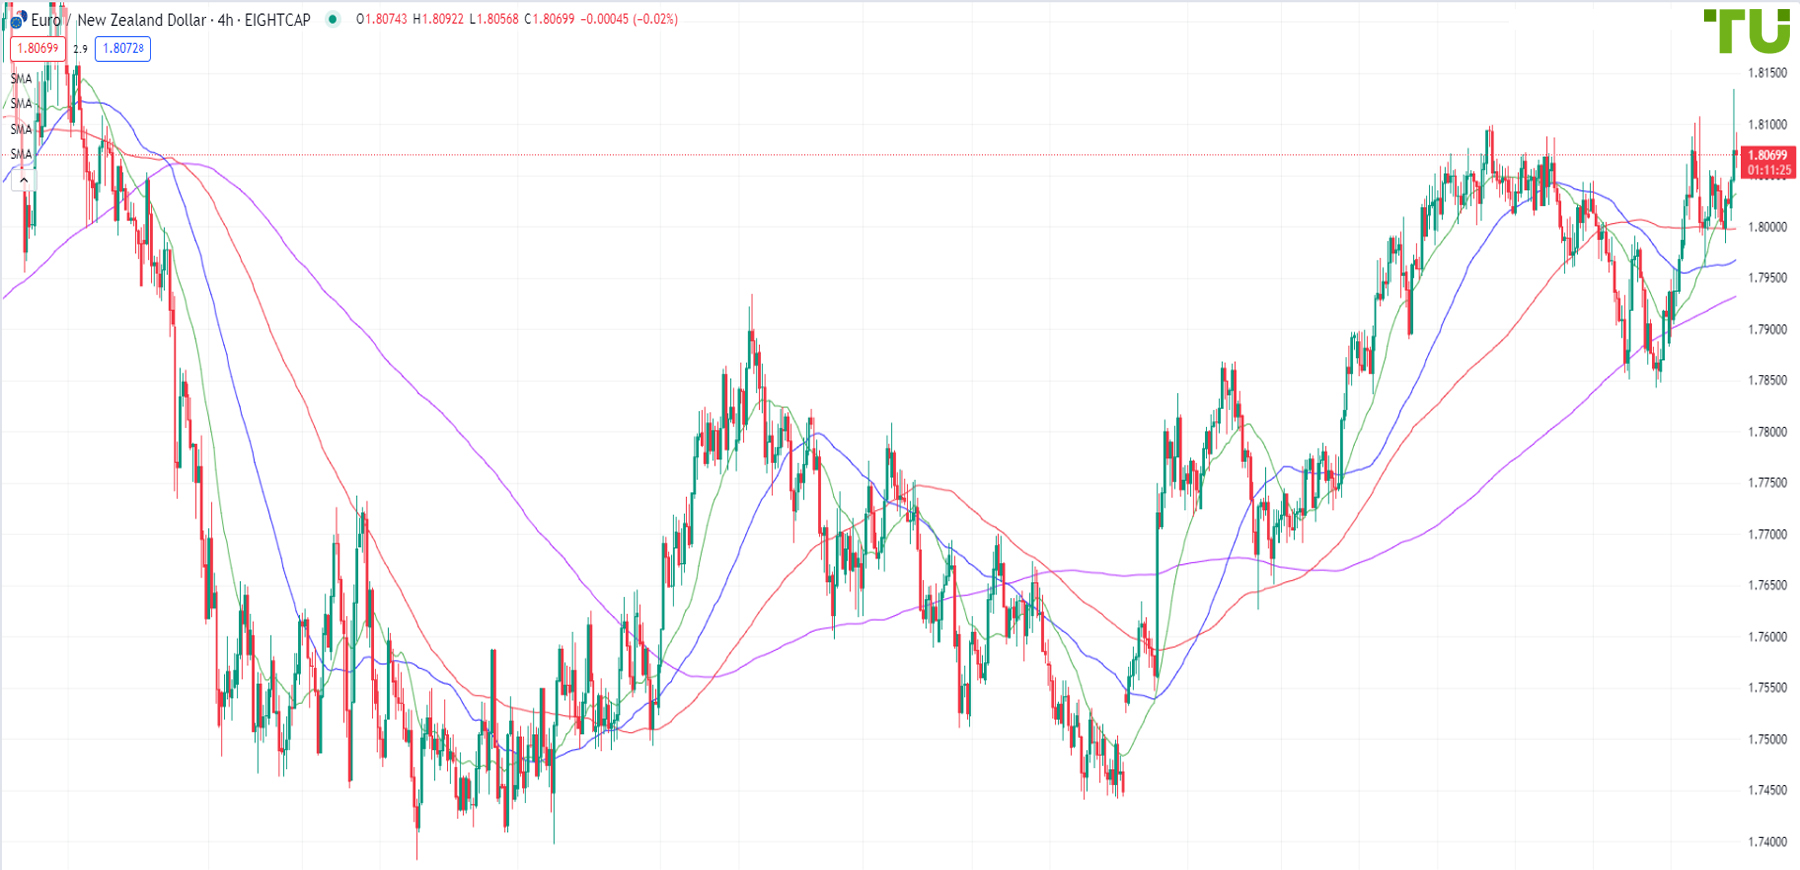 EUR/NZD declines after rising